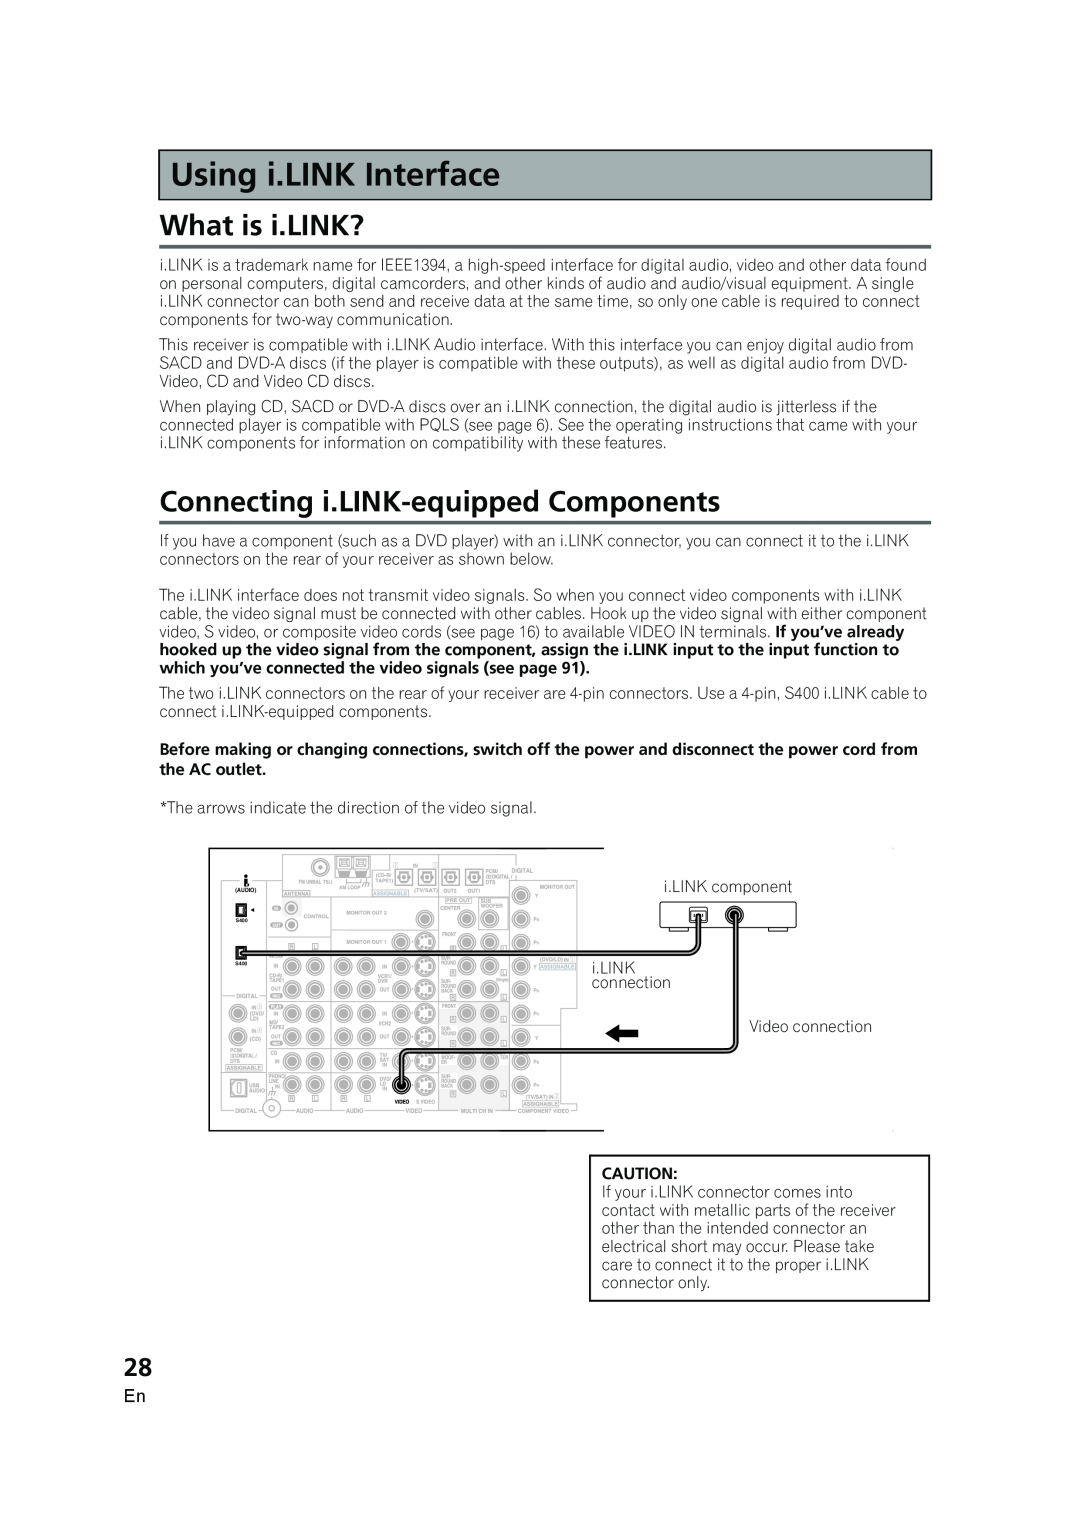 Pioneer VSX-AX5i-G manual What is i.LINK?, Connecting i.LINK-equippedComponents, Using.LINKi.LINKInterfaceInterface 